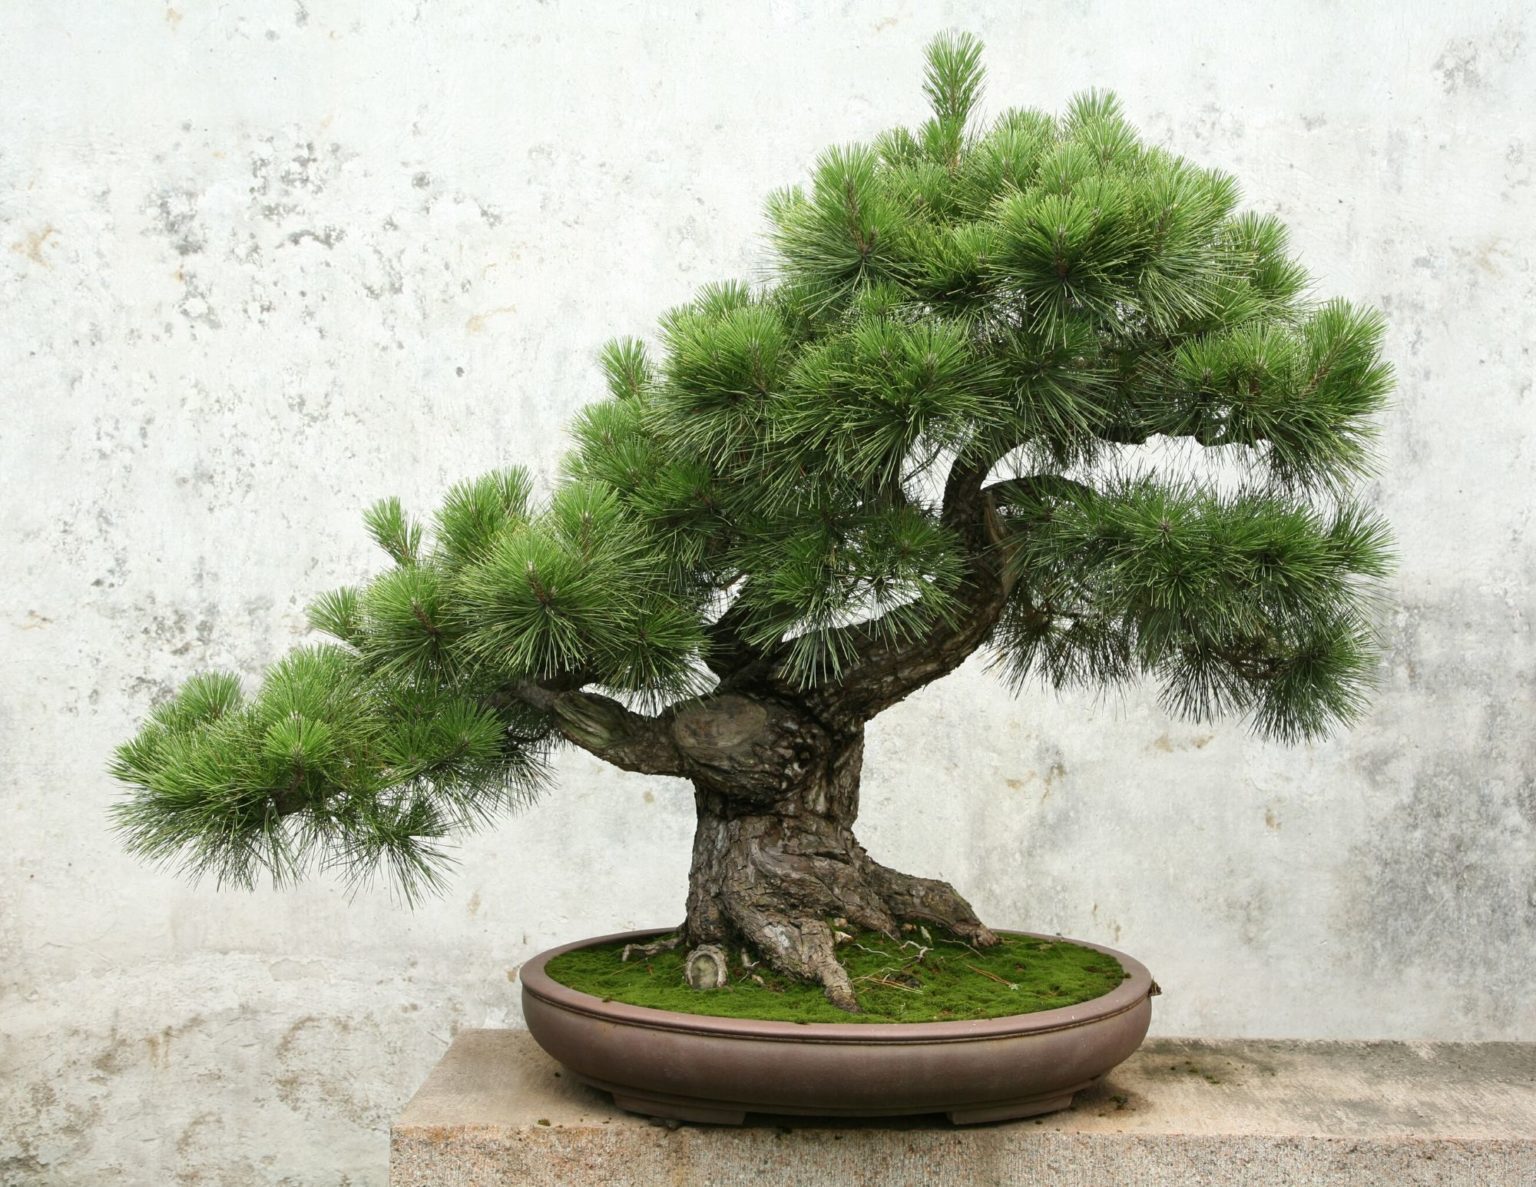 Top How To Take Care Of My Bonsai Tree in the world The ultimate guide 